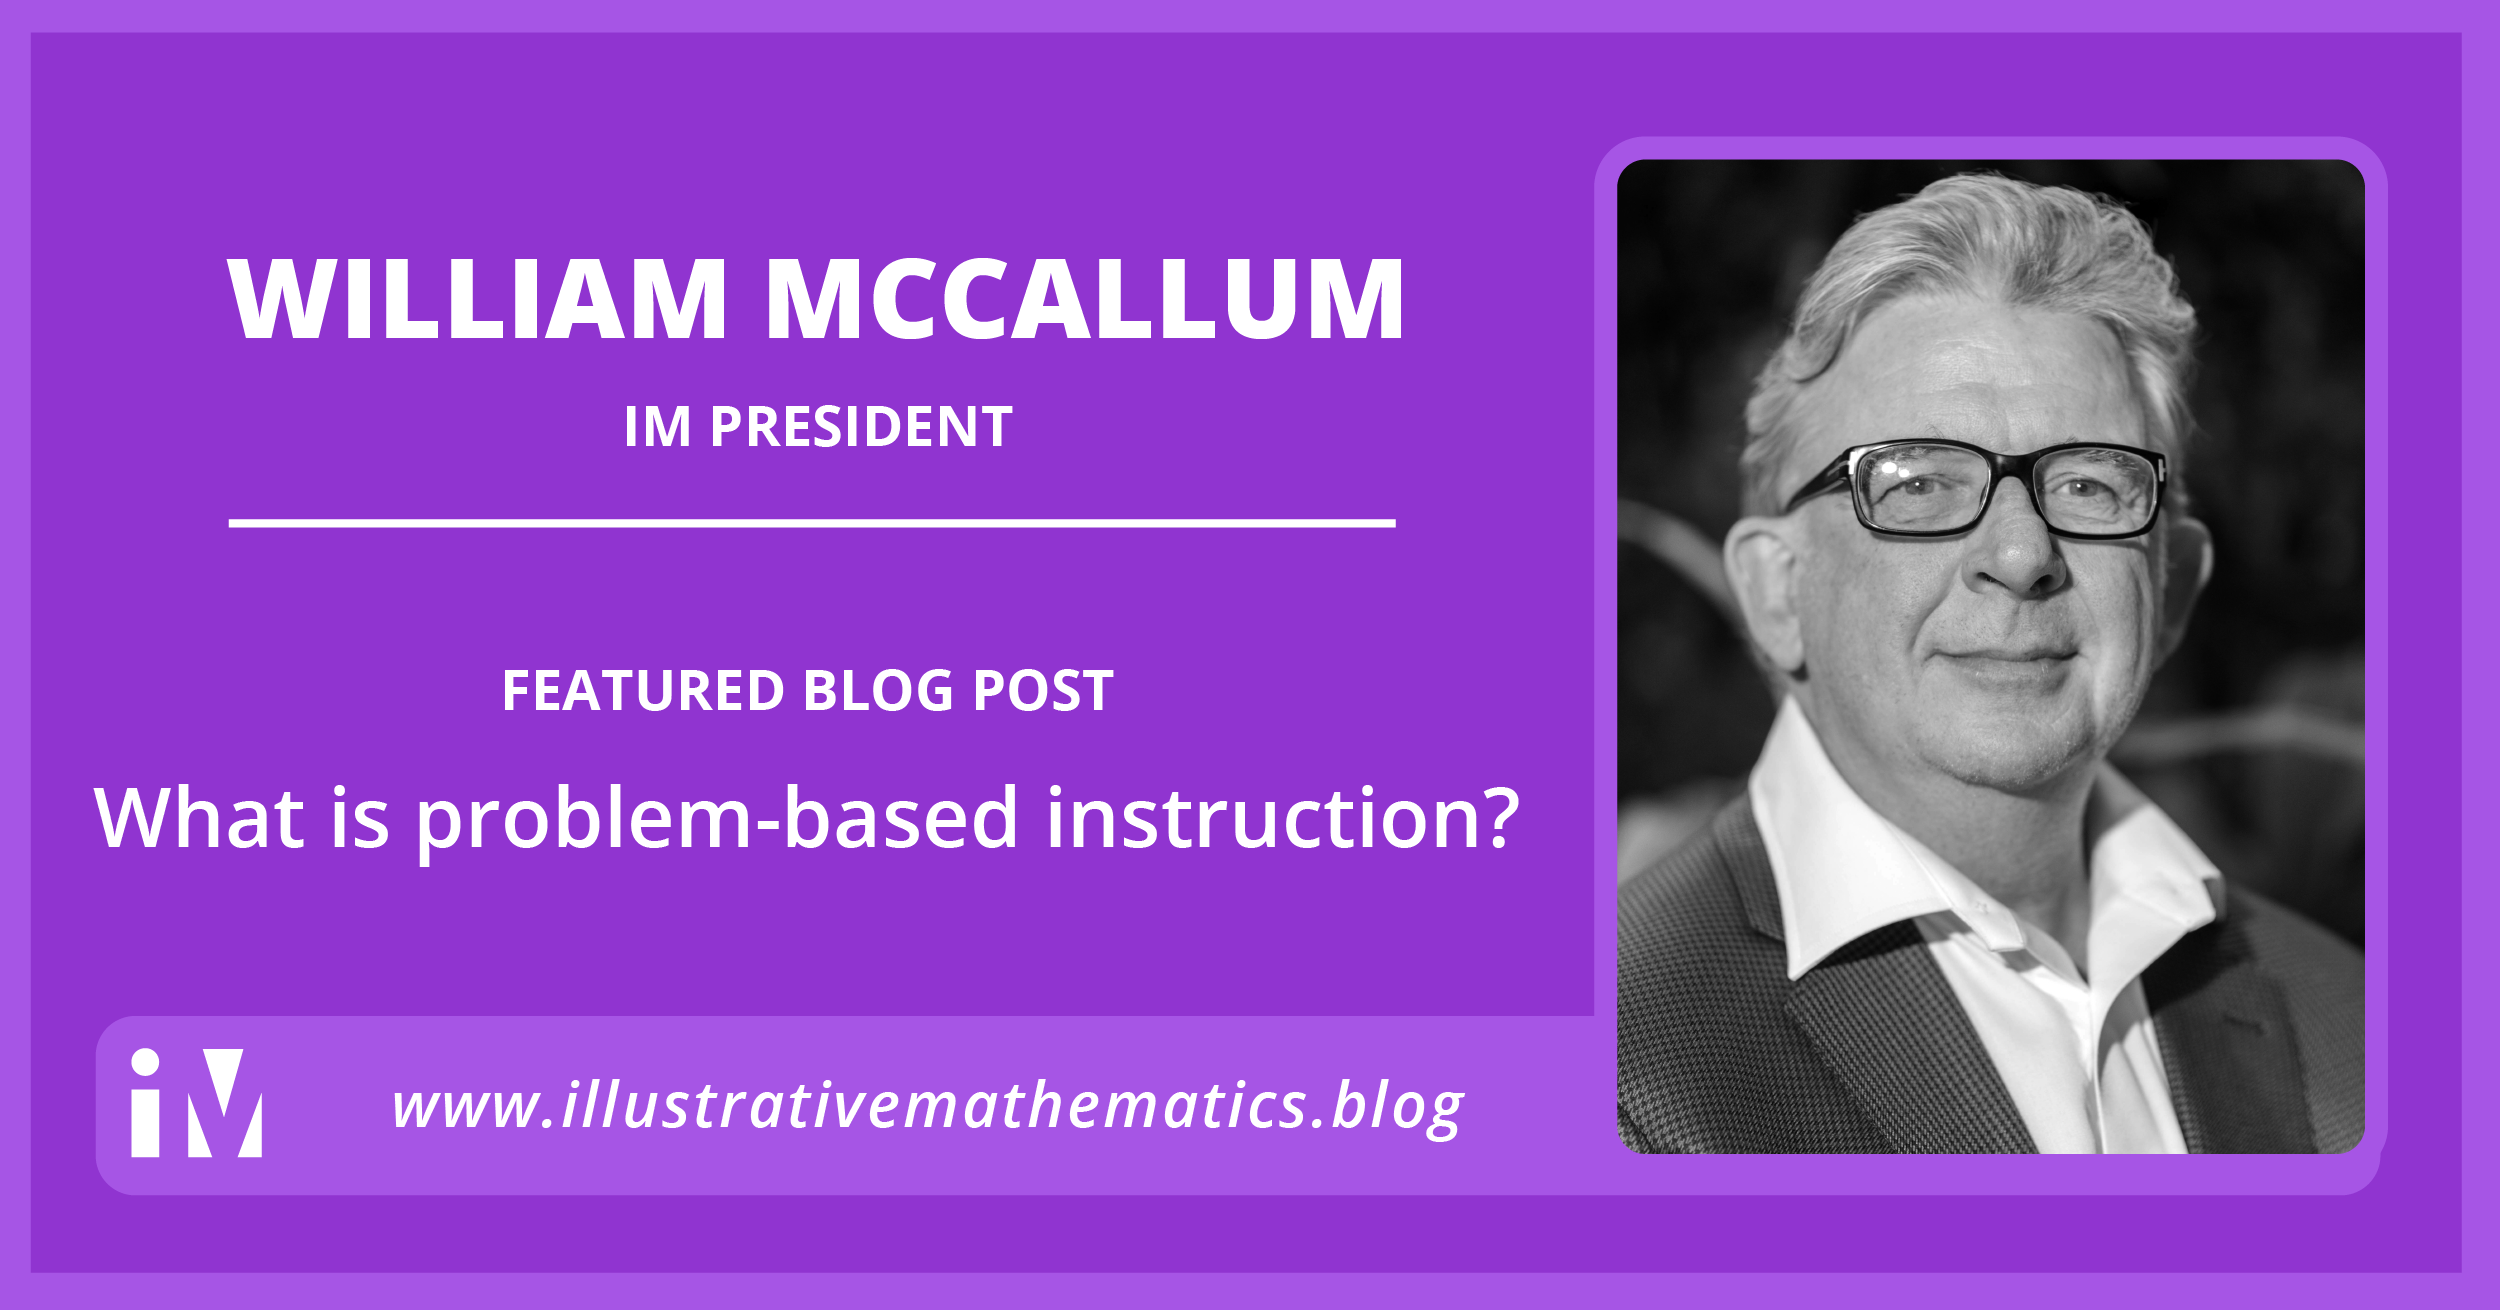 What is problem-based instruction?